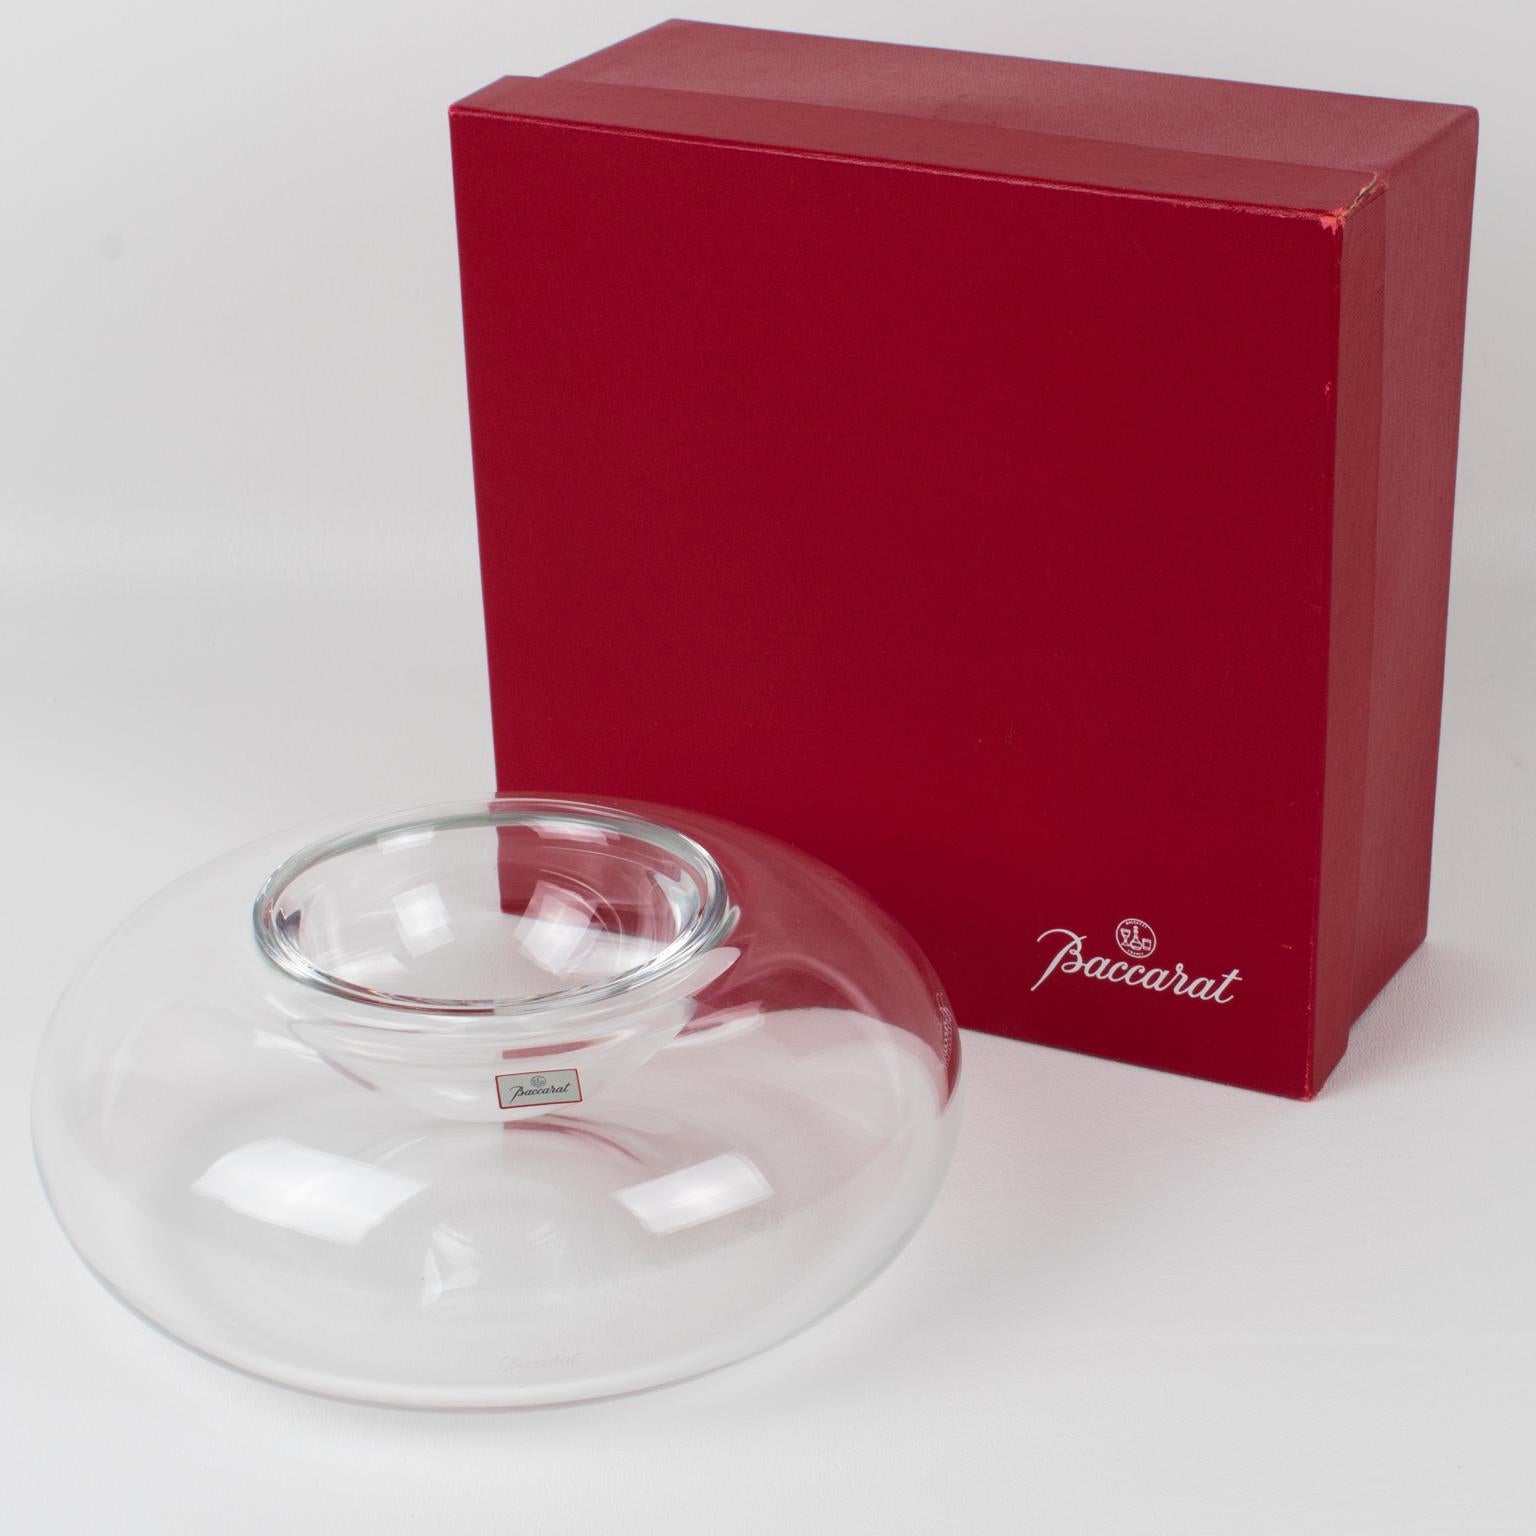 This is a luxury crystal caviar serving bowl, dish, or chiller designed by Baccarat at the turn of the 21st Century. The chic and minimalist design named 